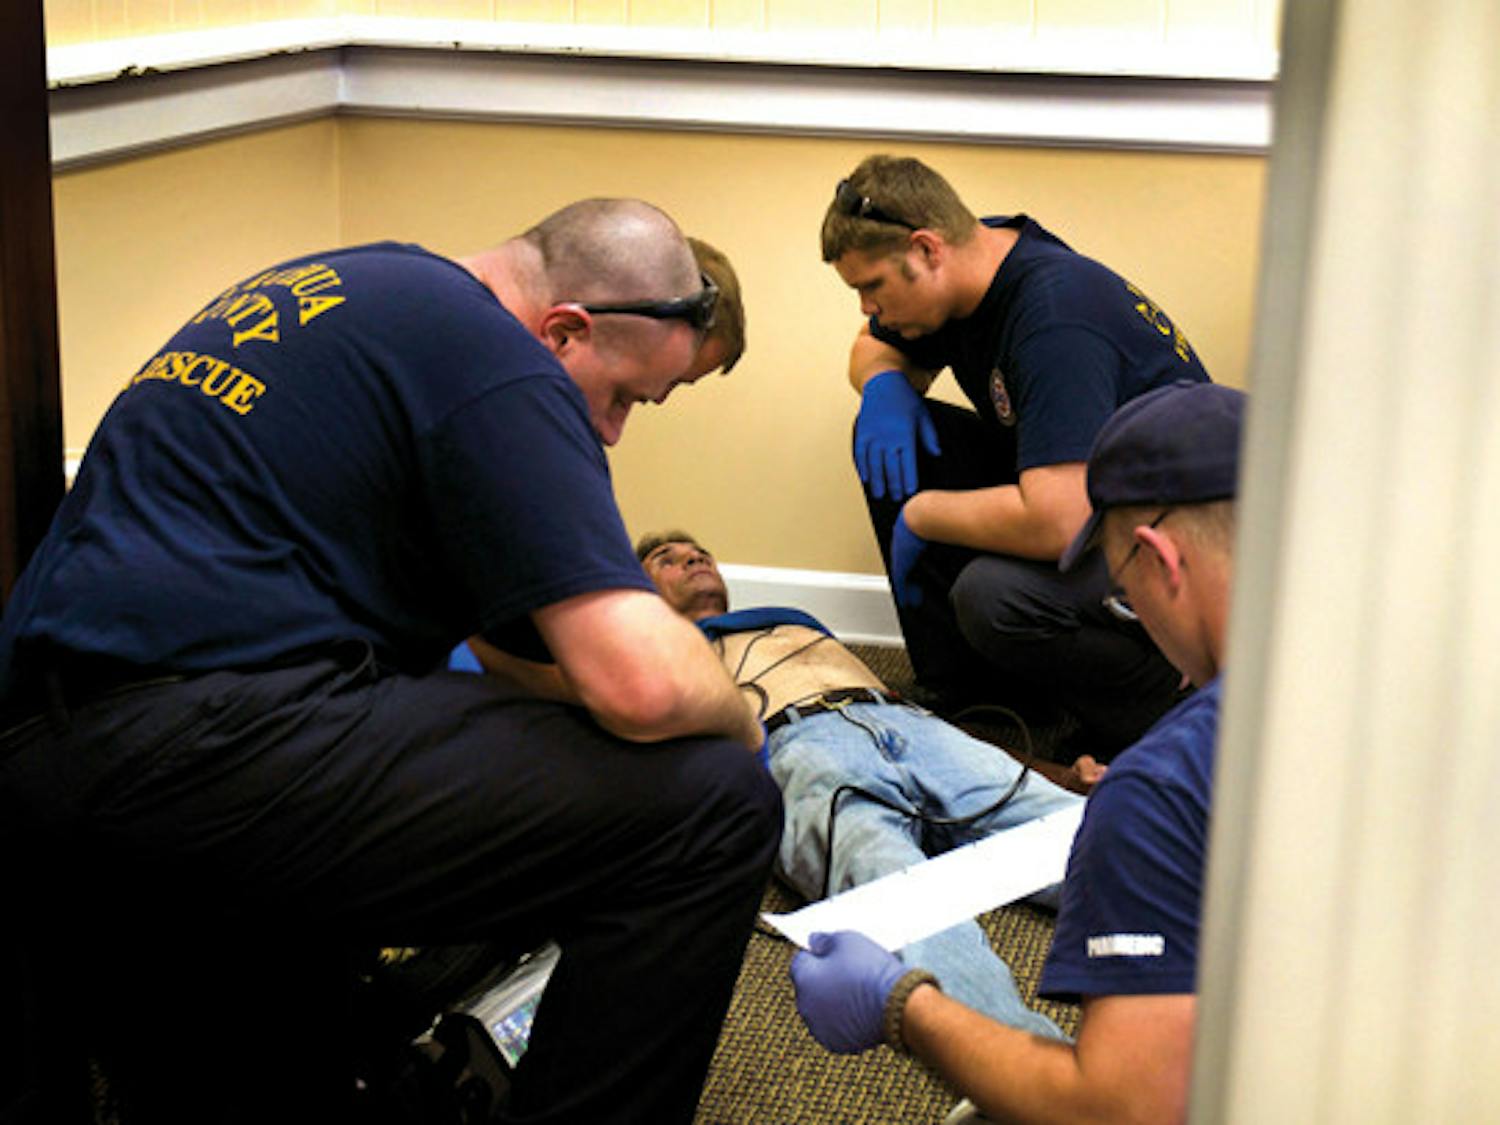 911 first responders treat a homeless man who was getting a check-up at the clinic when he started to feel chest pains on Mar. 21, 2011.